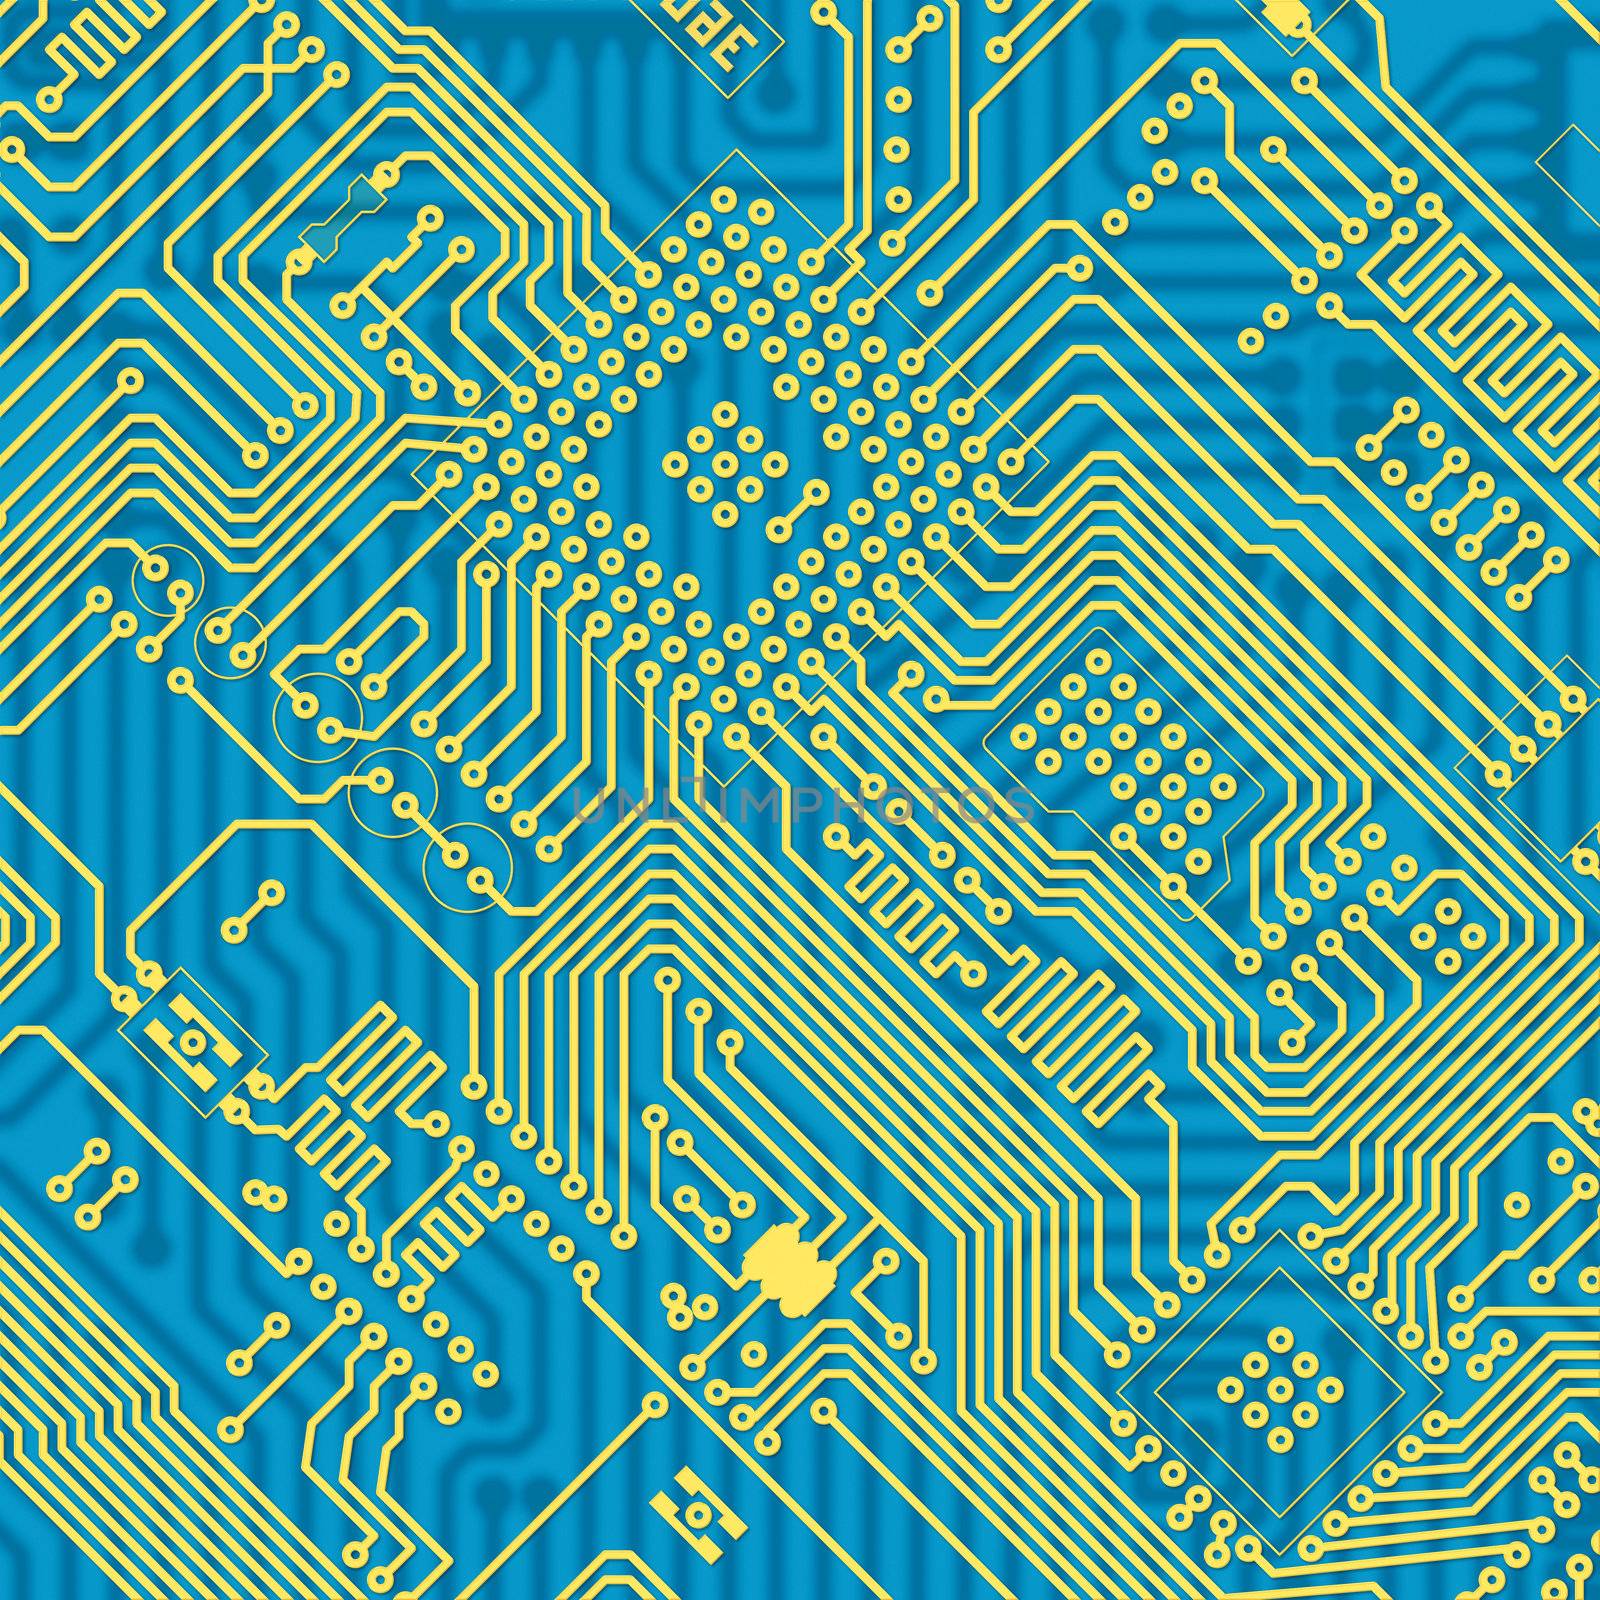 Printed blue industrial circuit board graphical texture